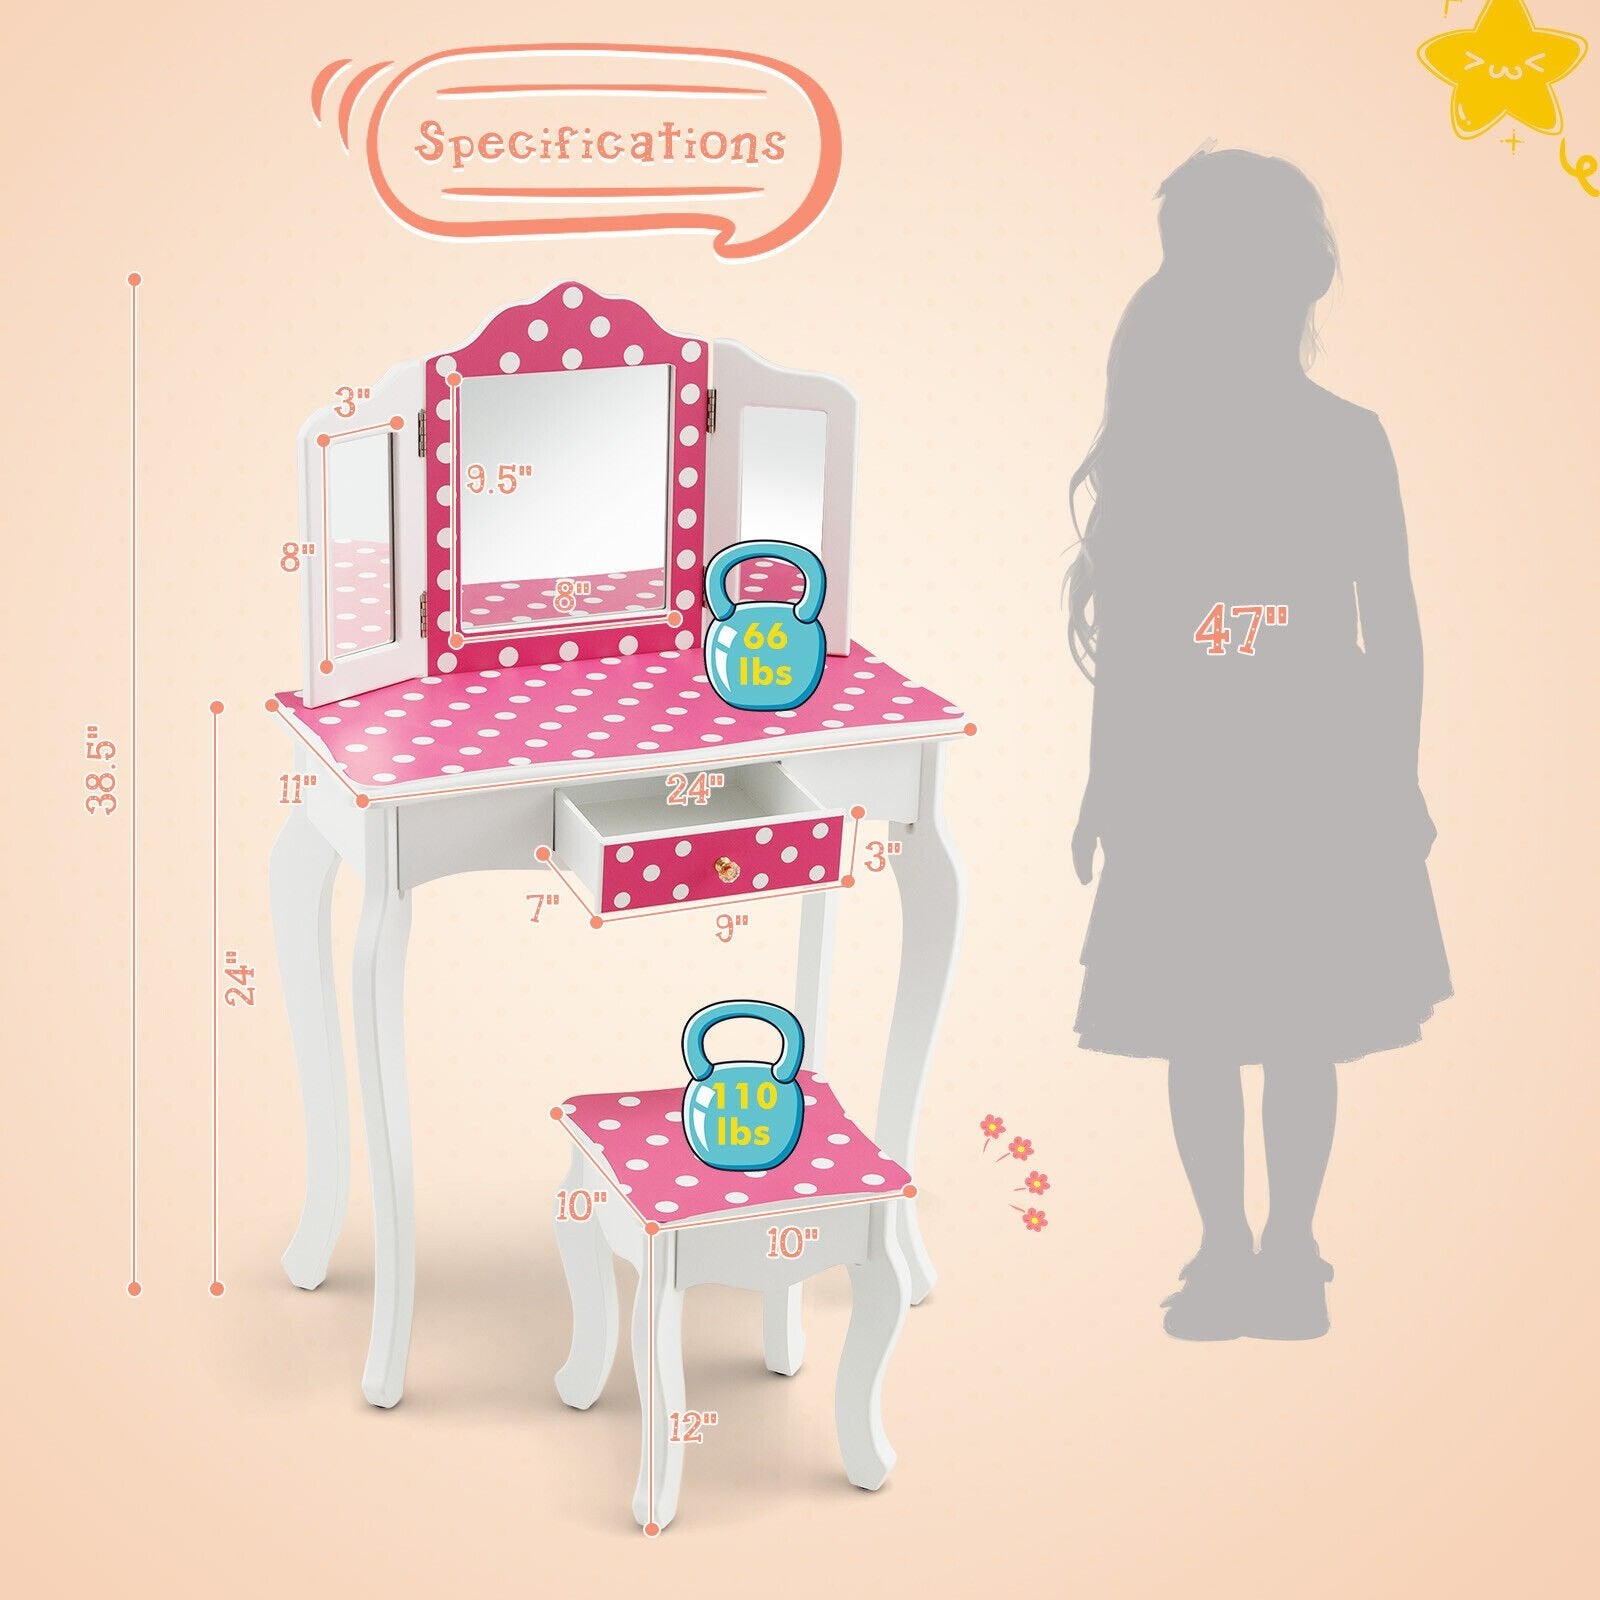 Kids Vanity Table and Stool Set with Cute Polka Dot Print, Pink - Gallery Canada